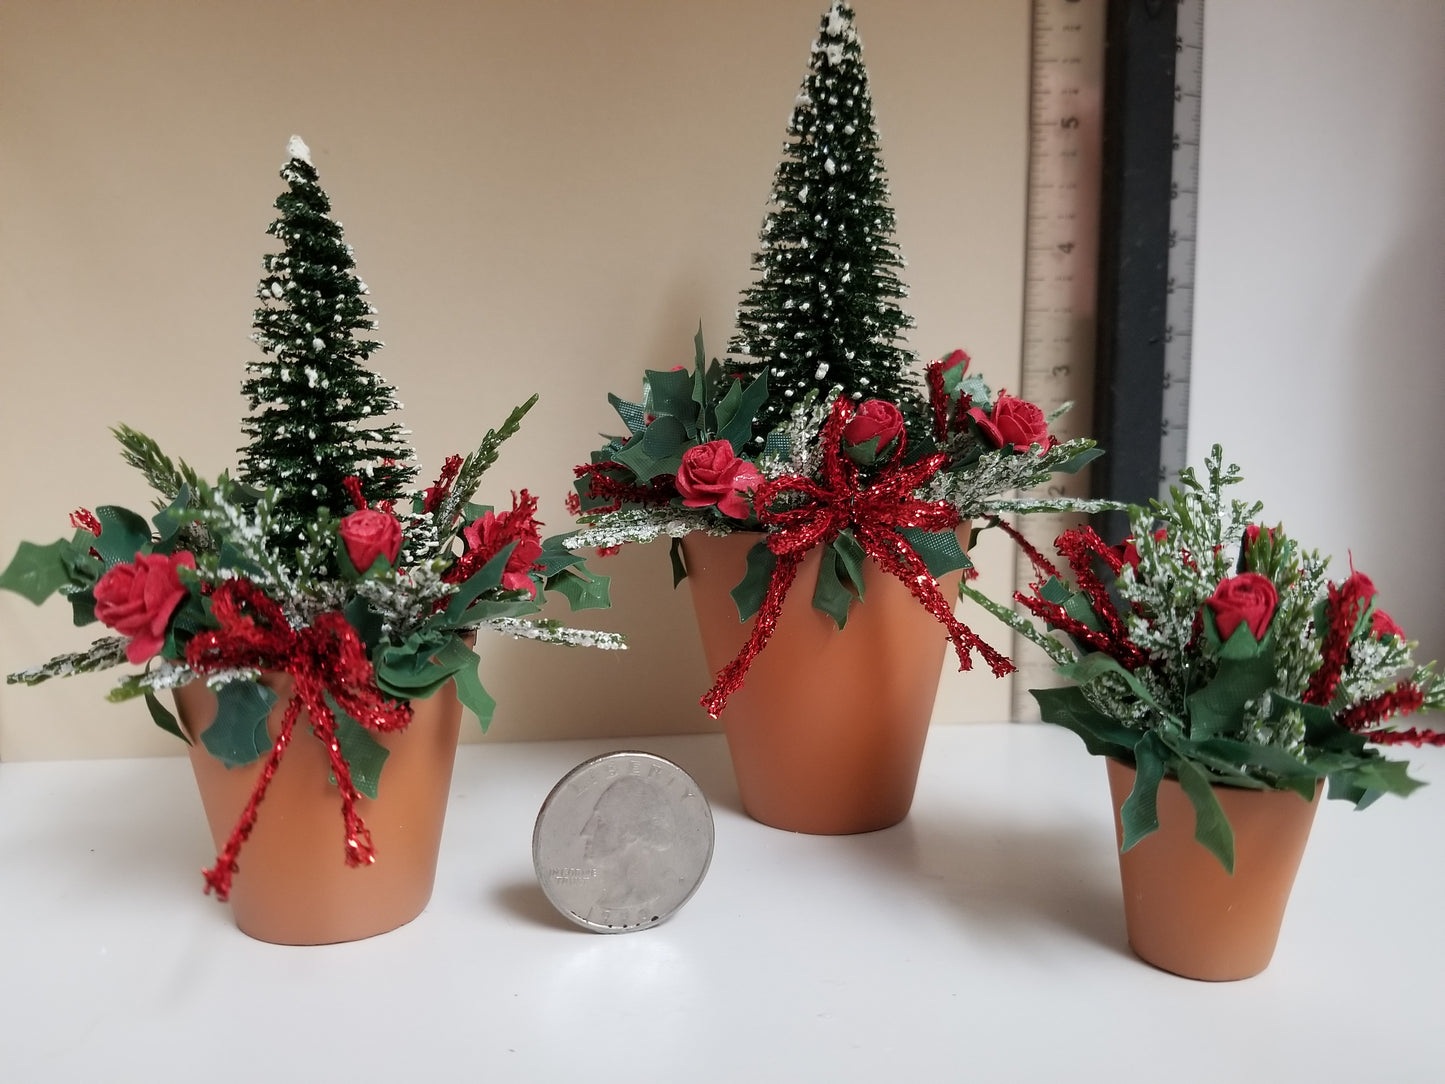 Miniature christmas arrangement in terra cotta pots with red roses and red bow accents.